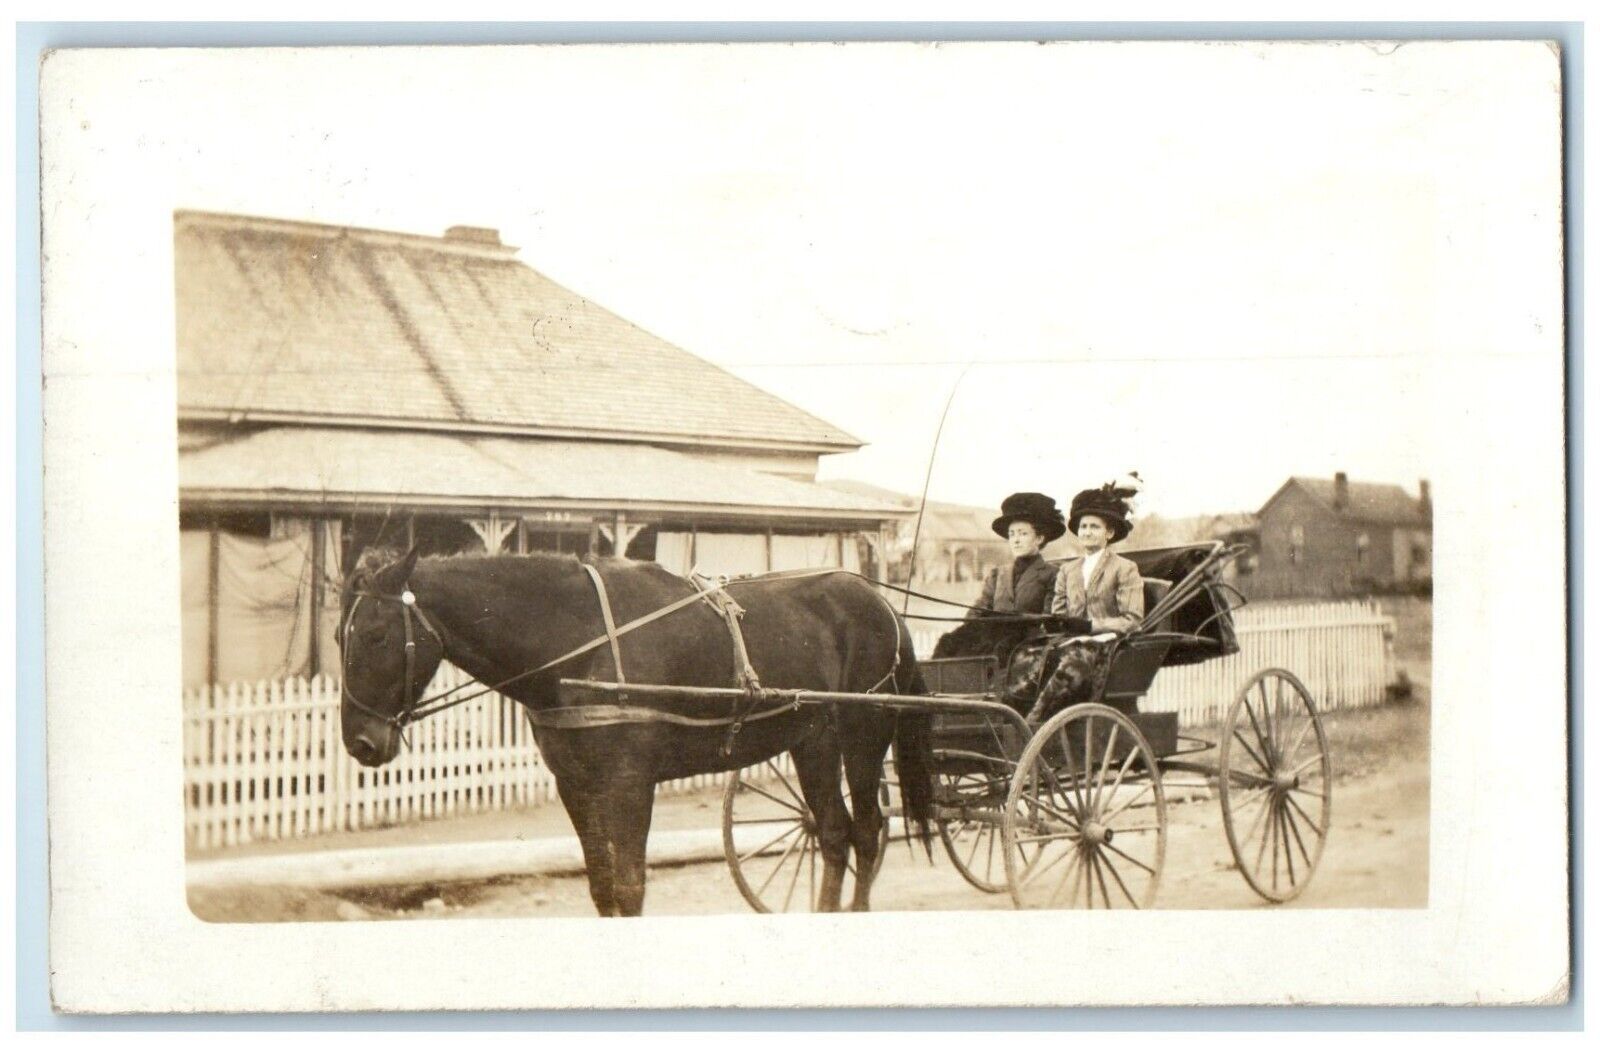 1911 Women Horse And Buggy Silver City New Mexico NM RPPC Photo Antique Postcard